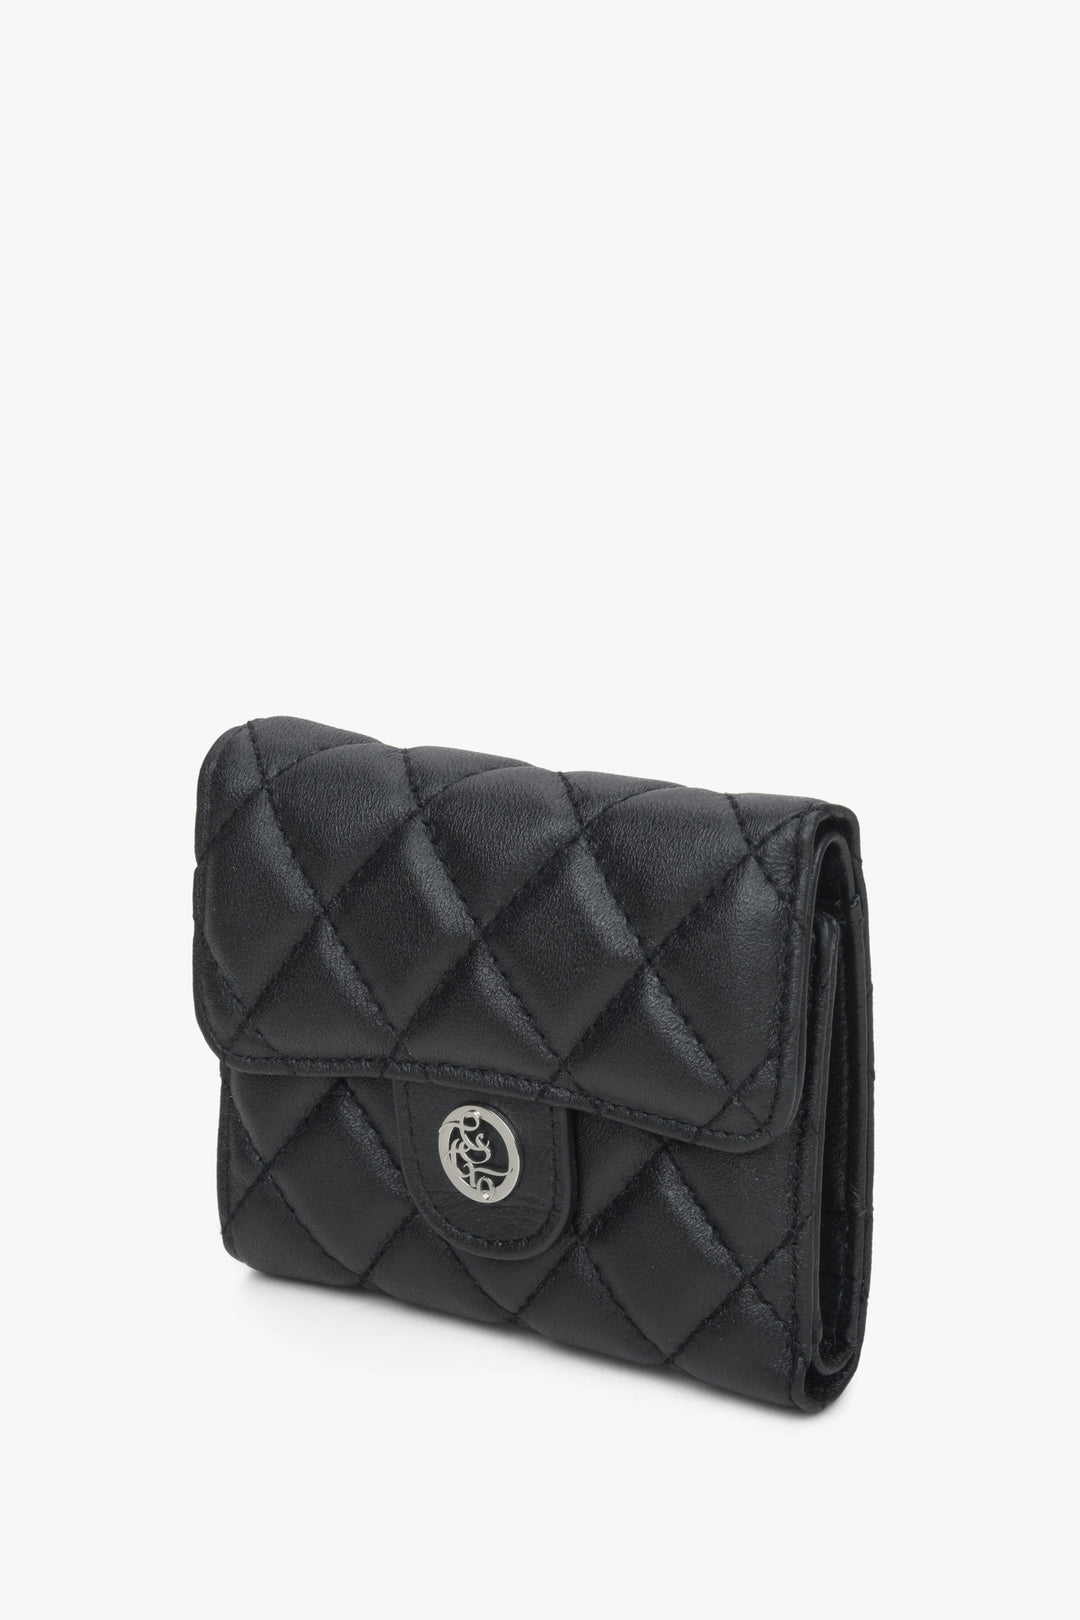 Women's tri-fold black wallet with embossing.